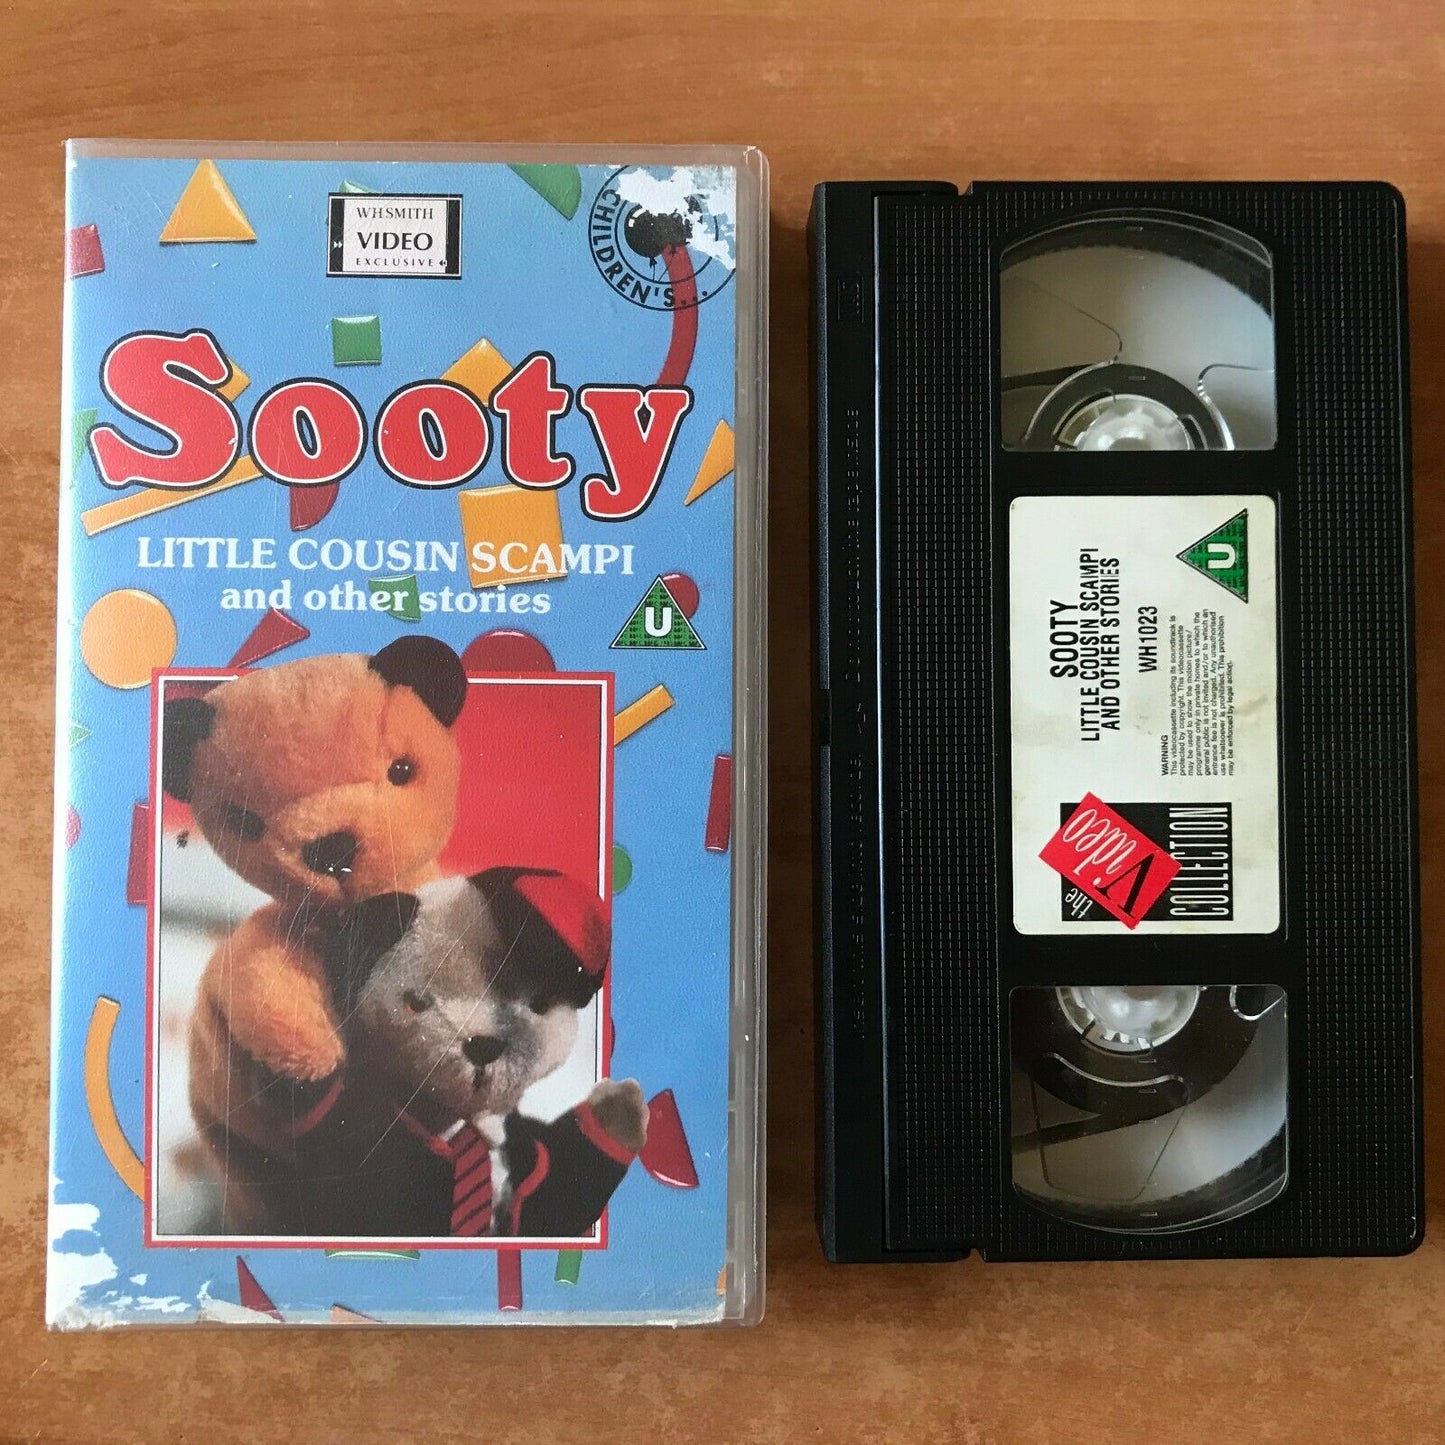 Sooty: Little Cousin Scampi; [WH Smith Video]: "Sticky Situation" - Kids - VHS-